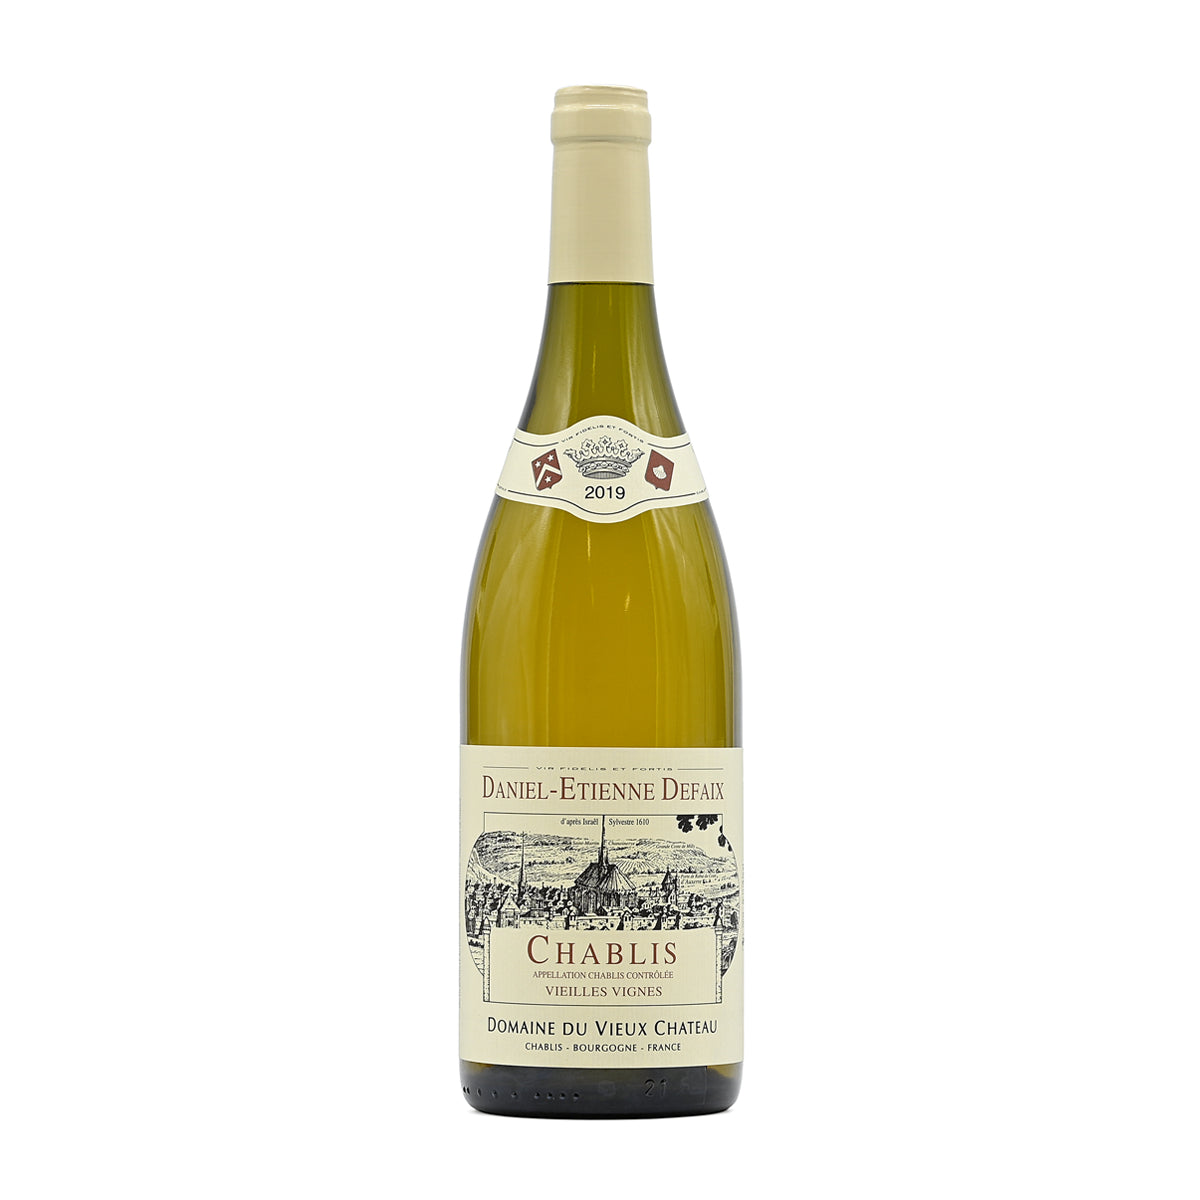 Domaine Daniel-Etienne Defaix Chablis Vieilles Vignes 2019, 750ml French white wine, made from Chardonnay; from Chablis Valley, Burgundy, France – GDV Fine Wines, Hong Kong